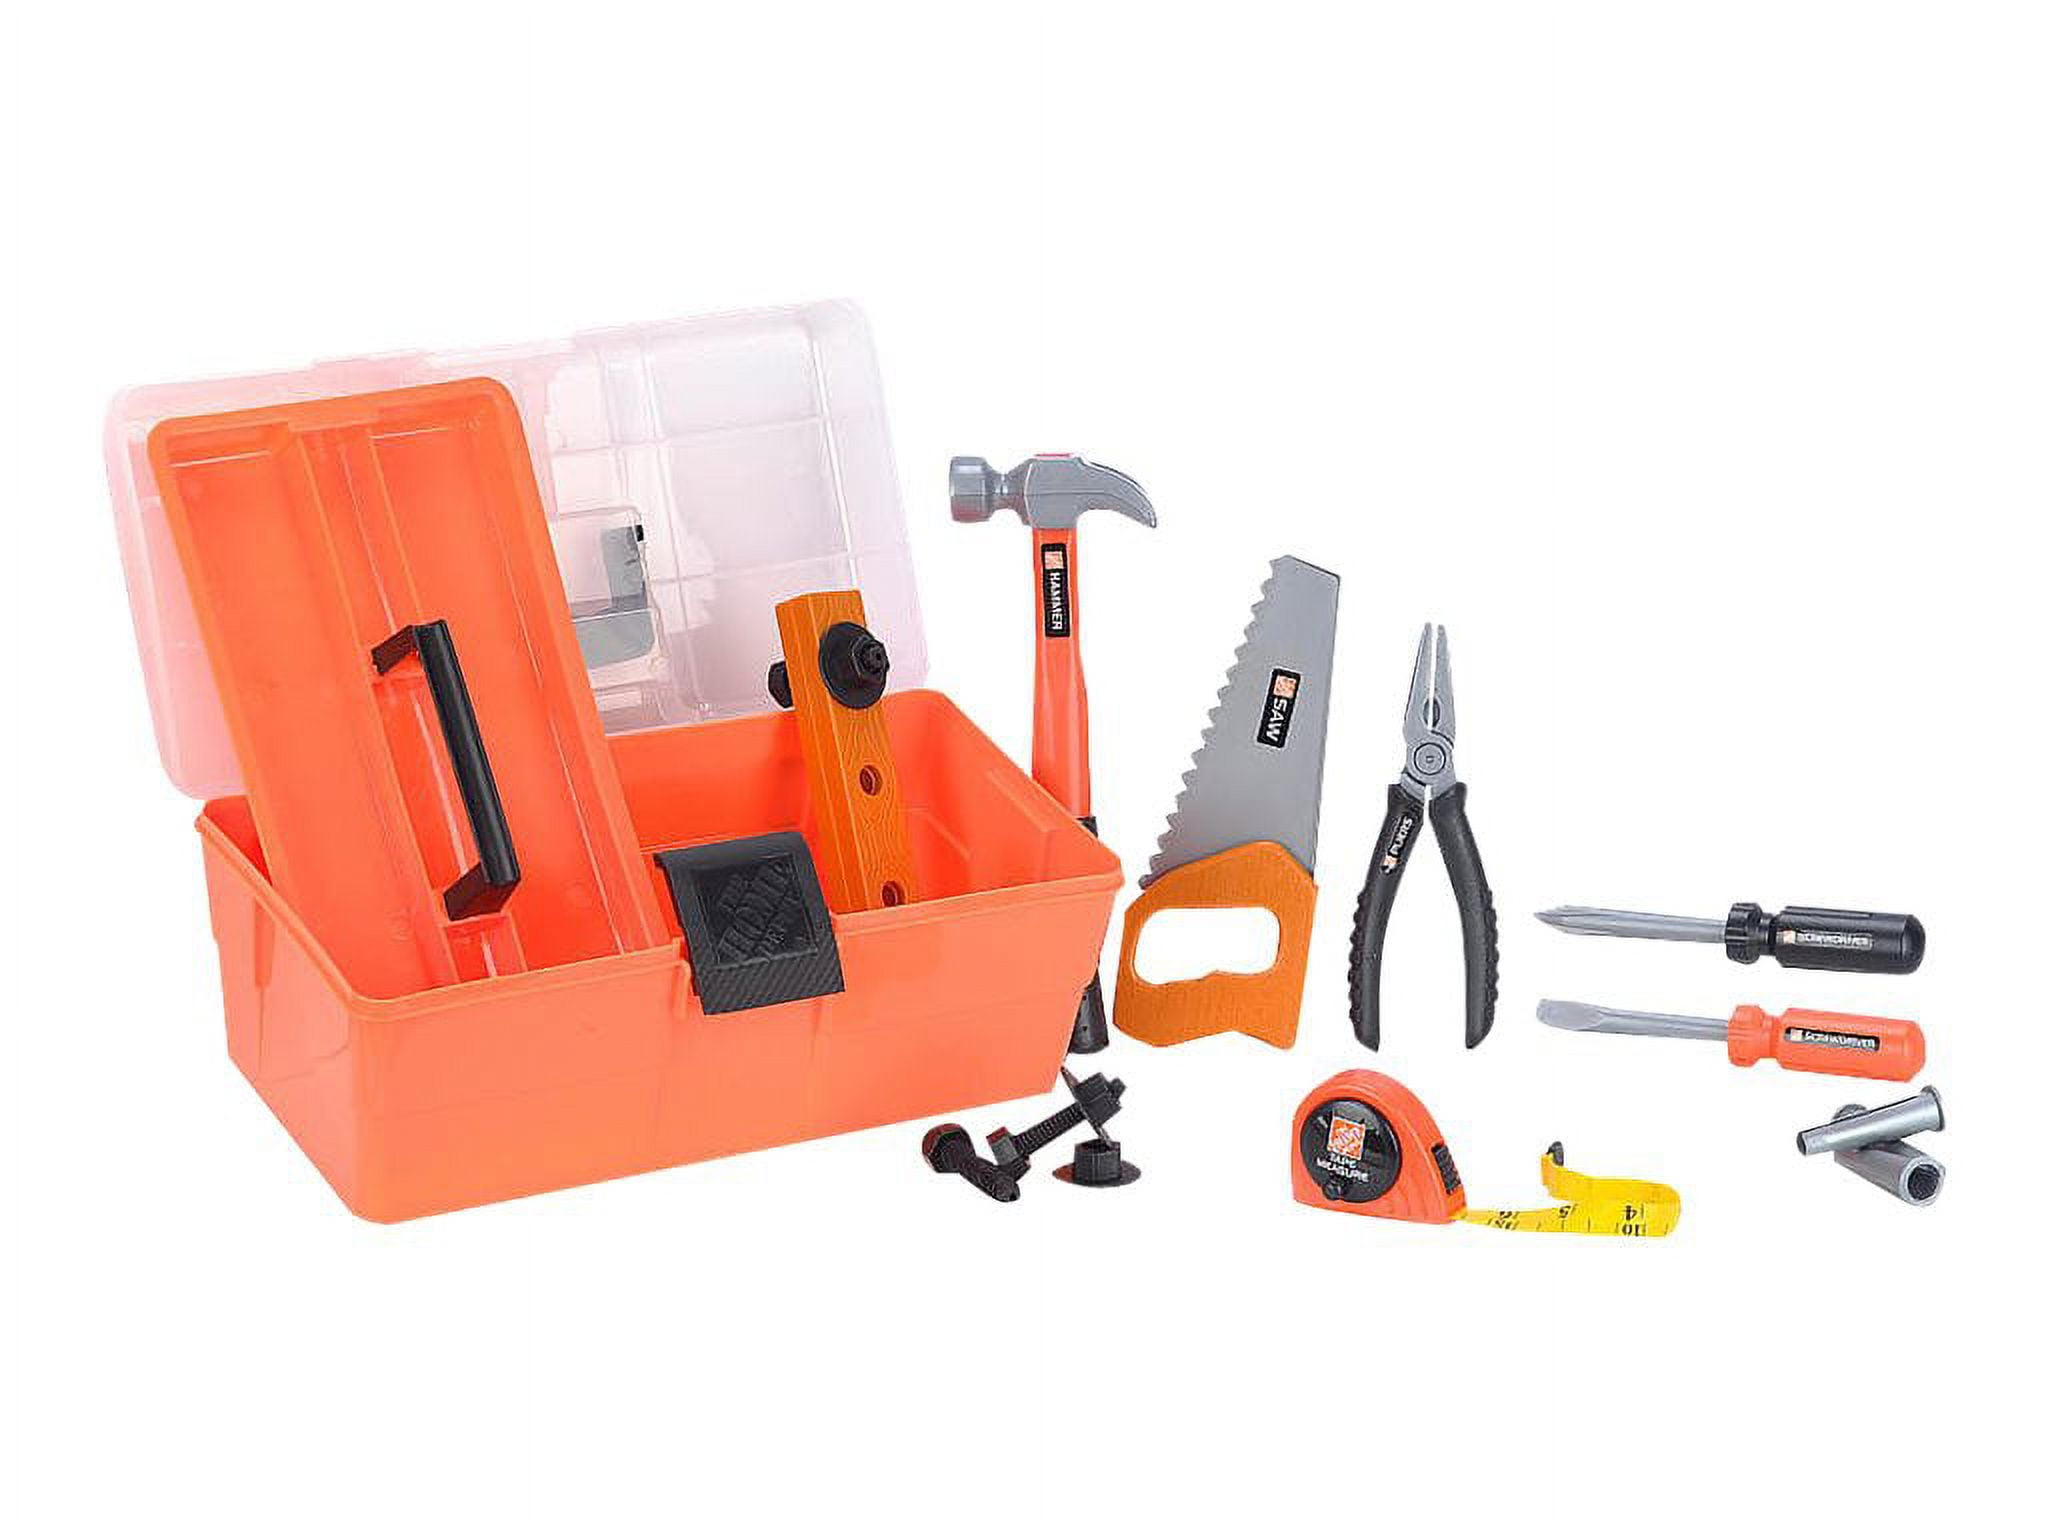 The Home Depot 10 Piece Wood Set Real Tools For Kids Damage to Box